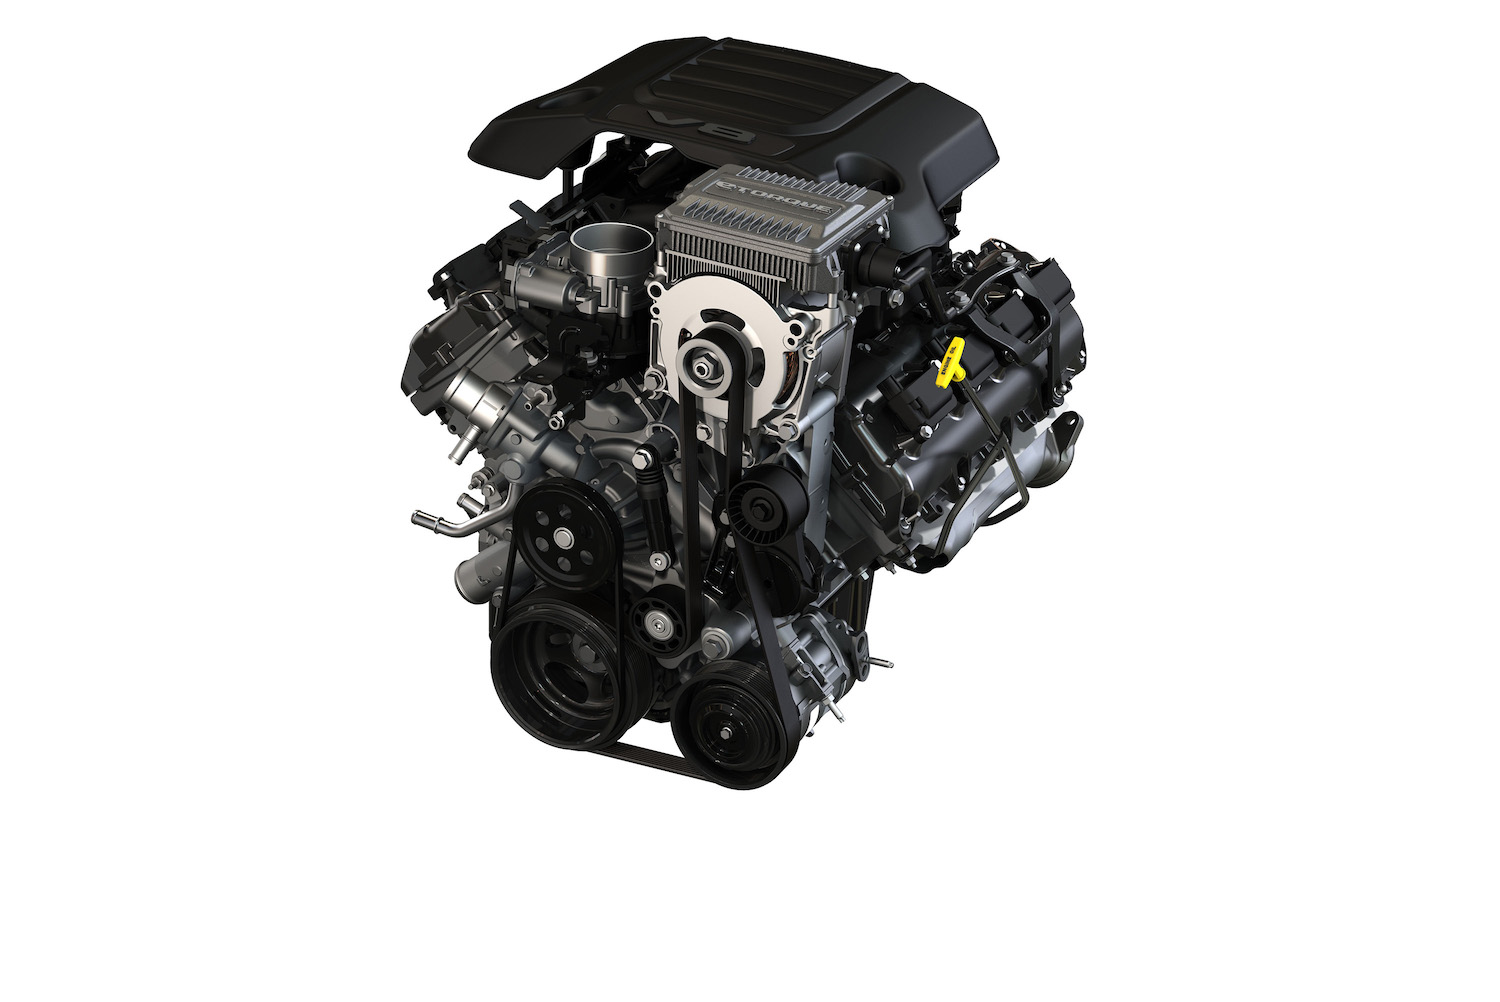 A HEMI V8 with an eTorque mild hybrid system may go into the new Charger | Stellantis